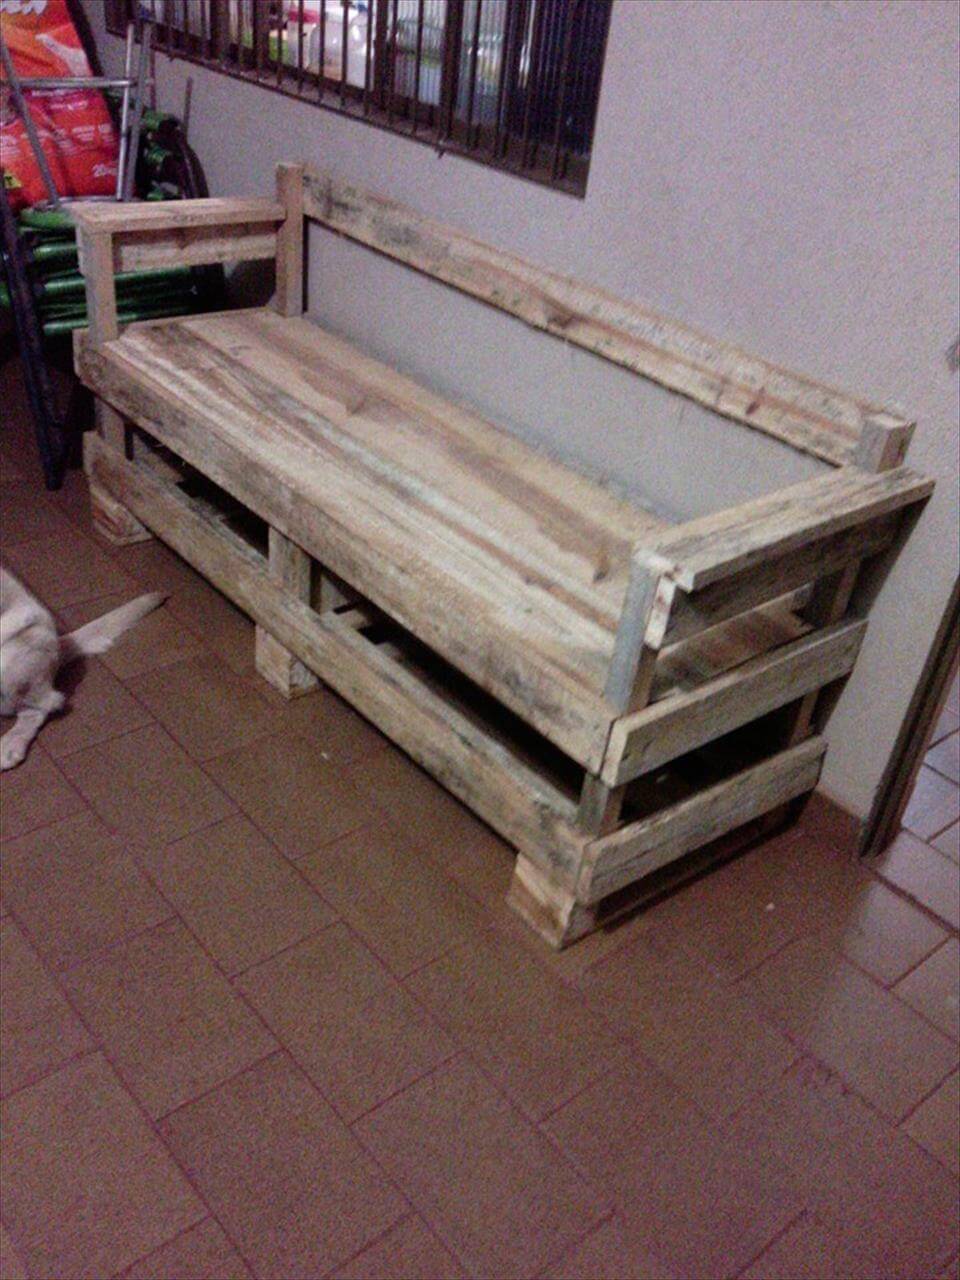 Wood Bench out of Pallets - 101 Pallet Ideas